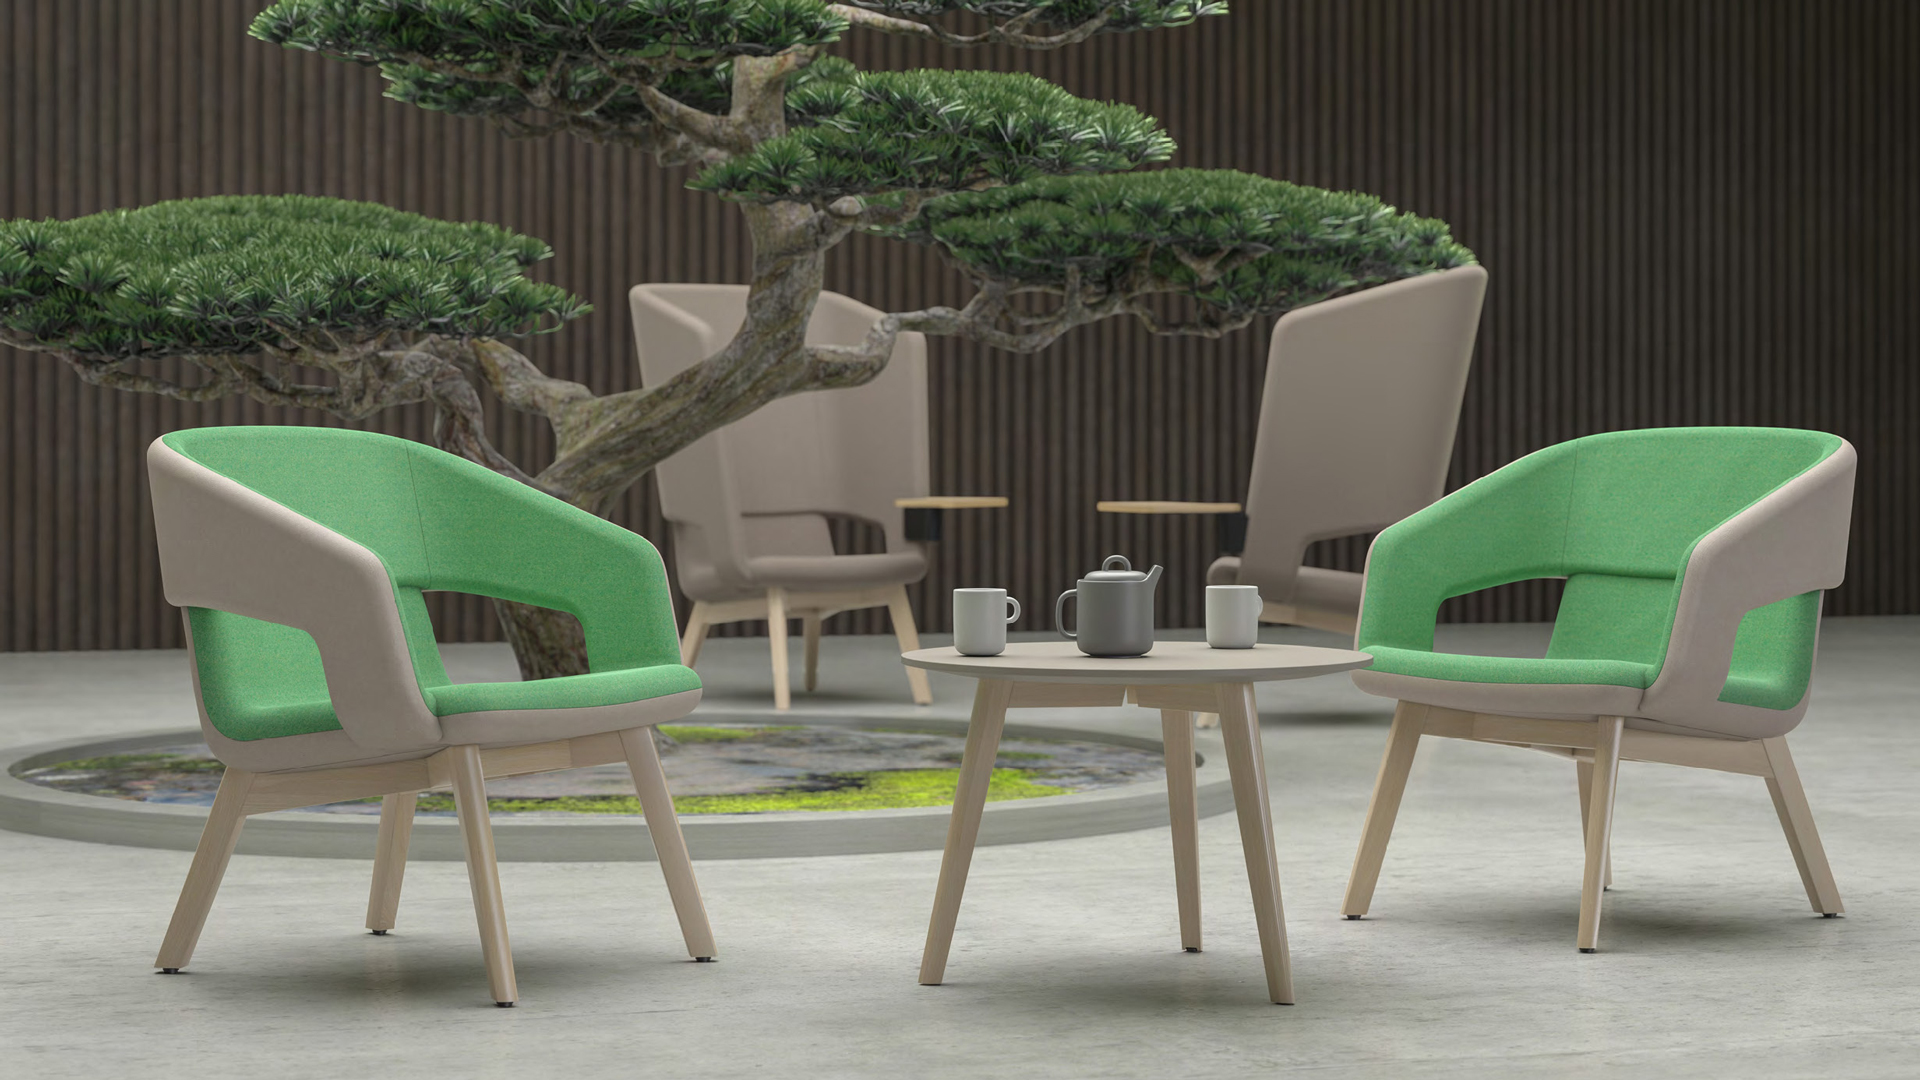 Twist &amp; Sit Soft armchairs in green and grey with ash wooden legs